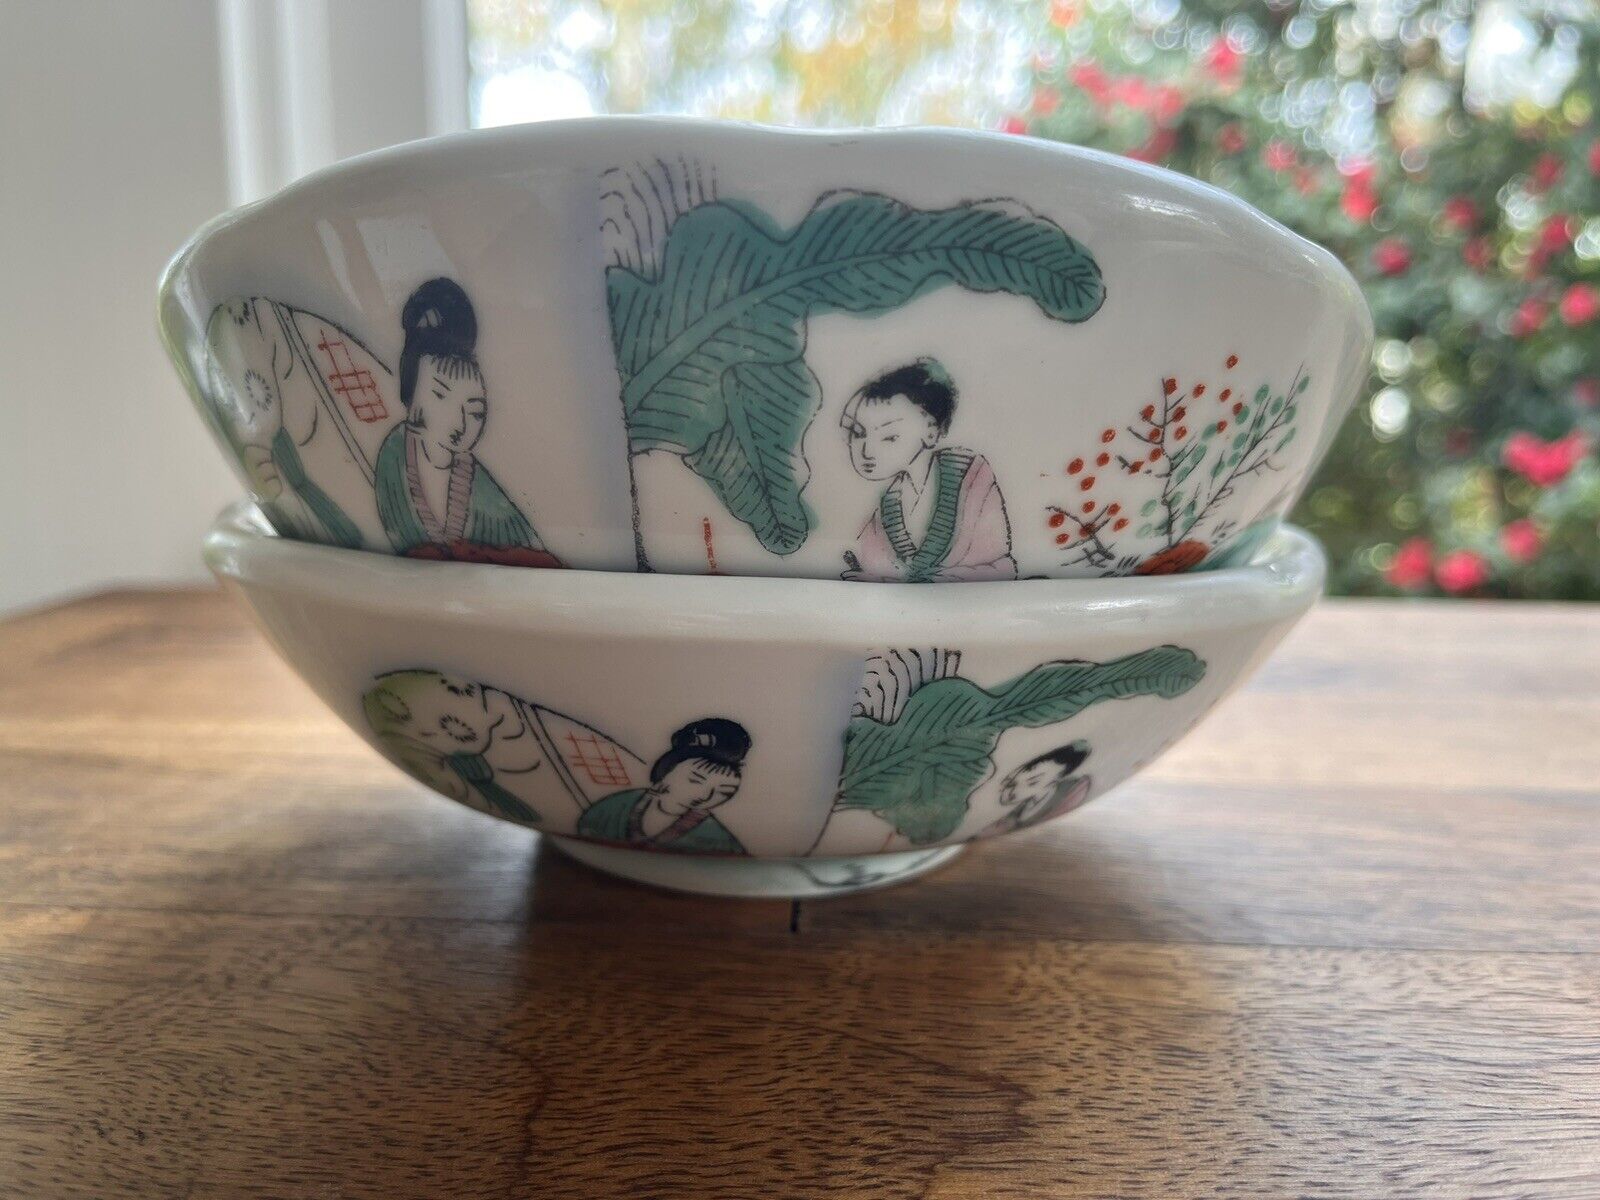 Pair of Vintage Chinese Scalloped Bowls by FS Louie Berkeley, Two Women